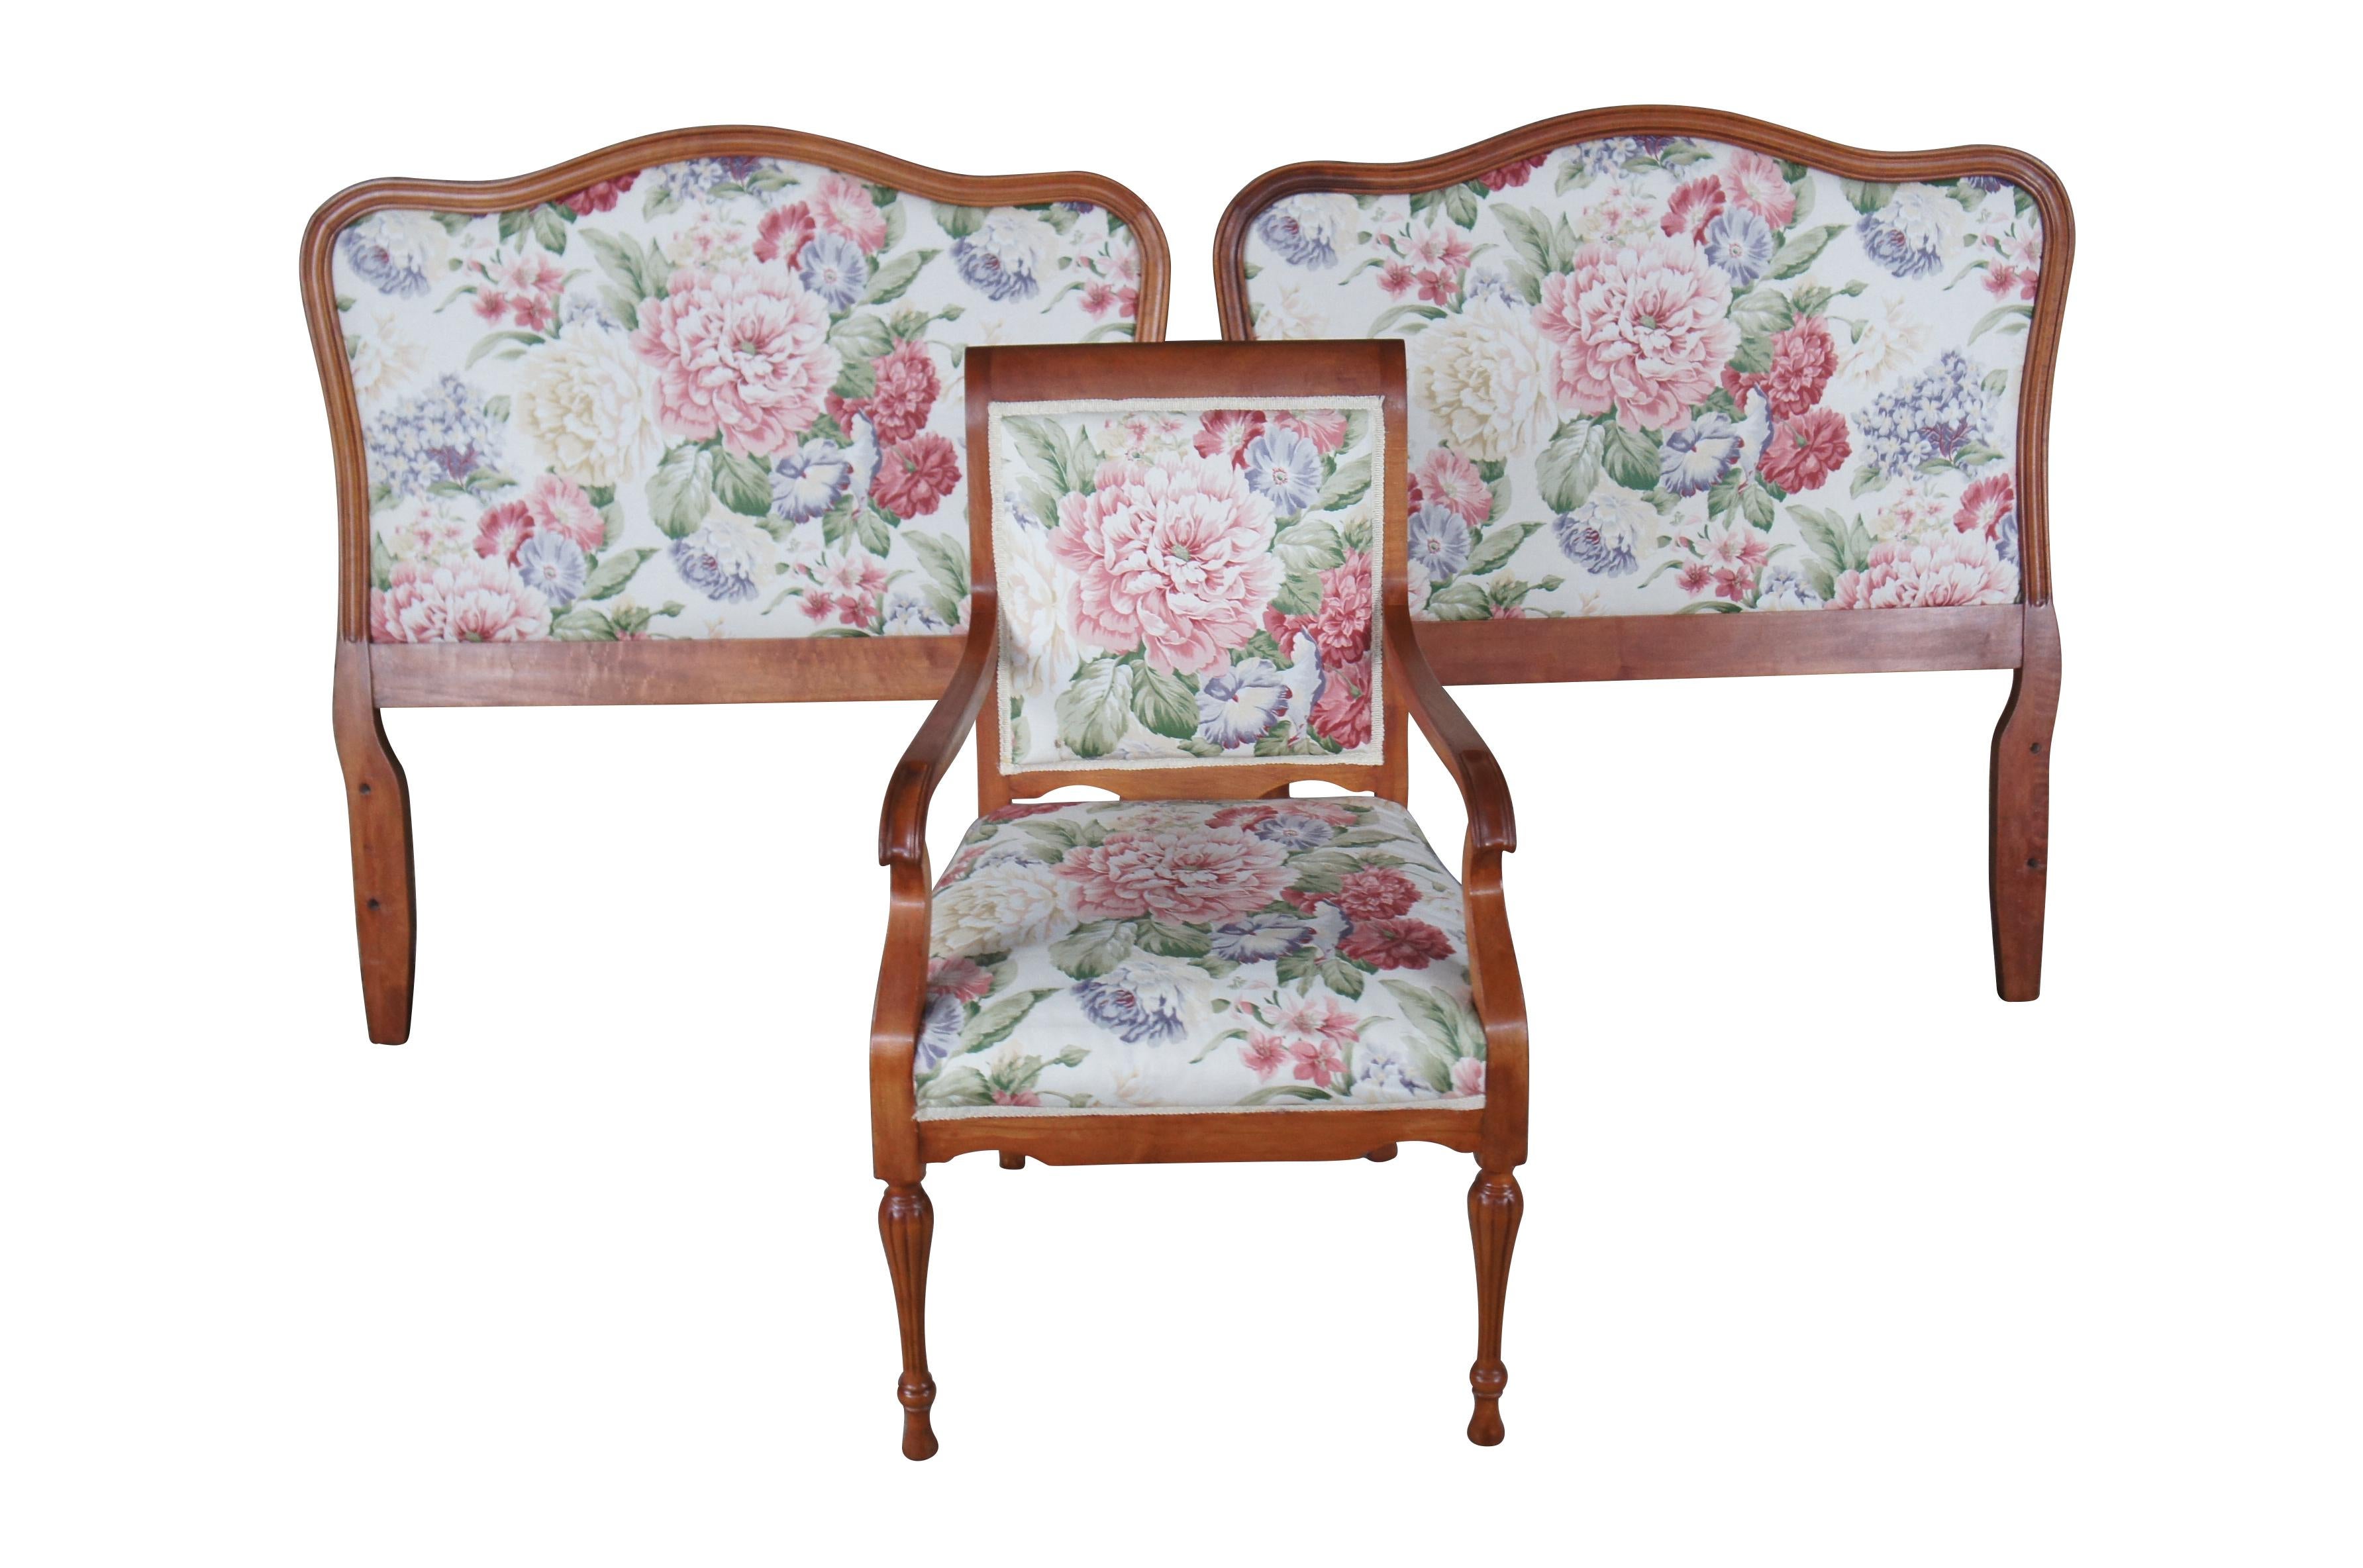 A vintage pair of twin beds and matching arm chair.  Made from mahogany with floral upholstery.  The two beds  camelback design.  The armchair has sloped arms and is supported by fluted and turned legs.

Dimensions:
headboards 38.5